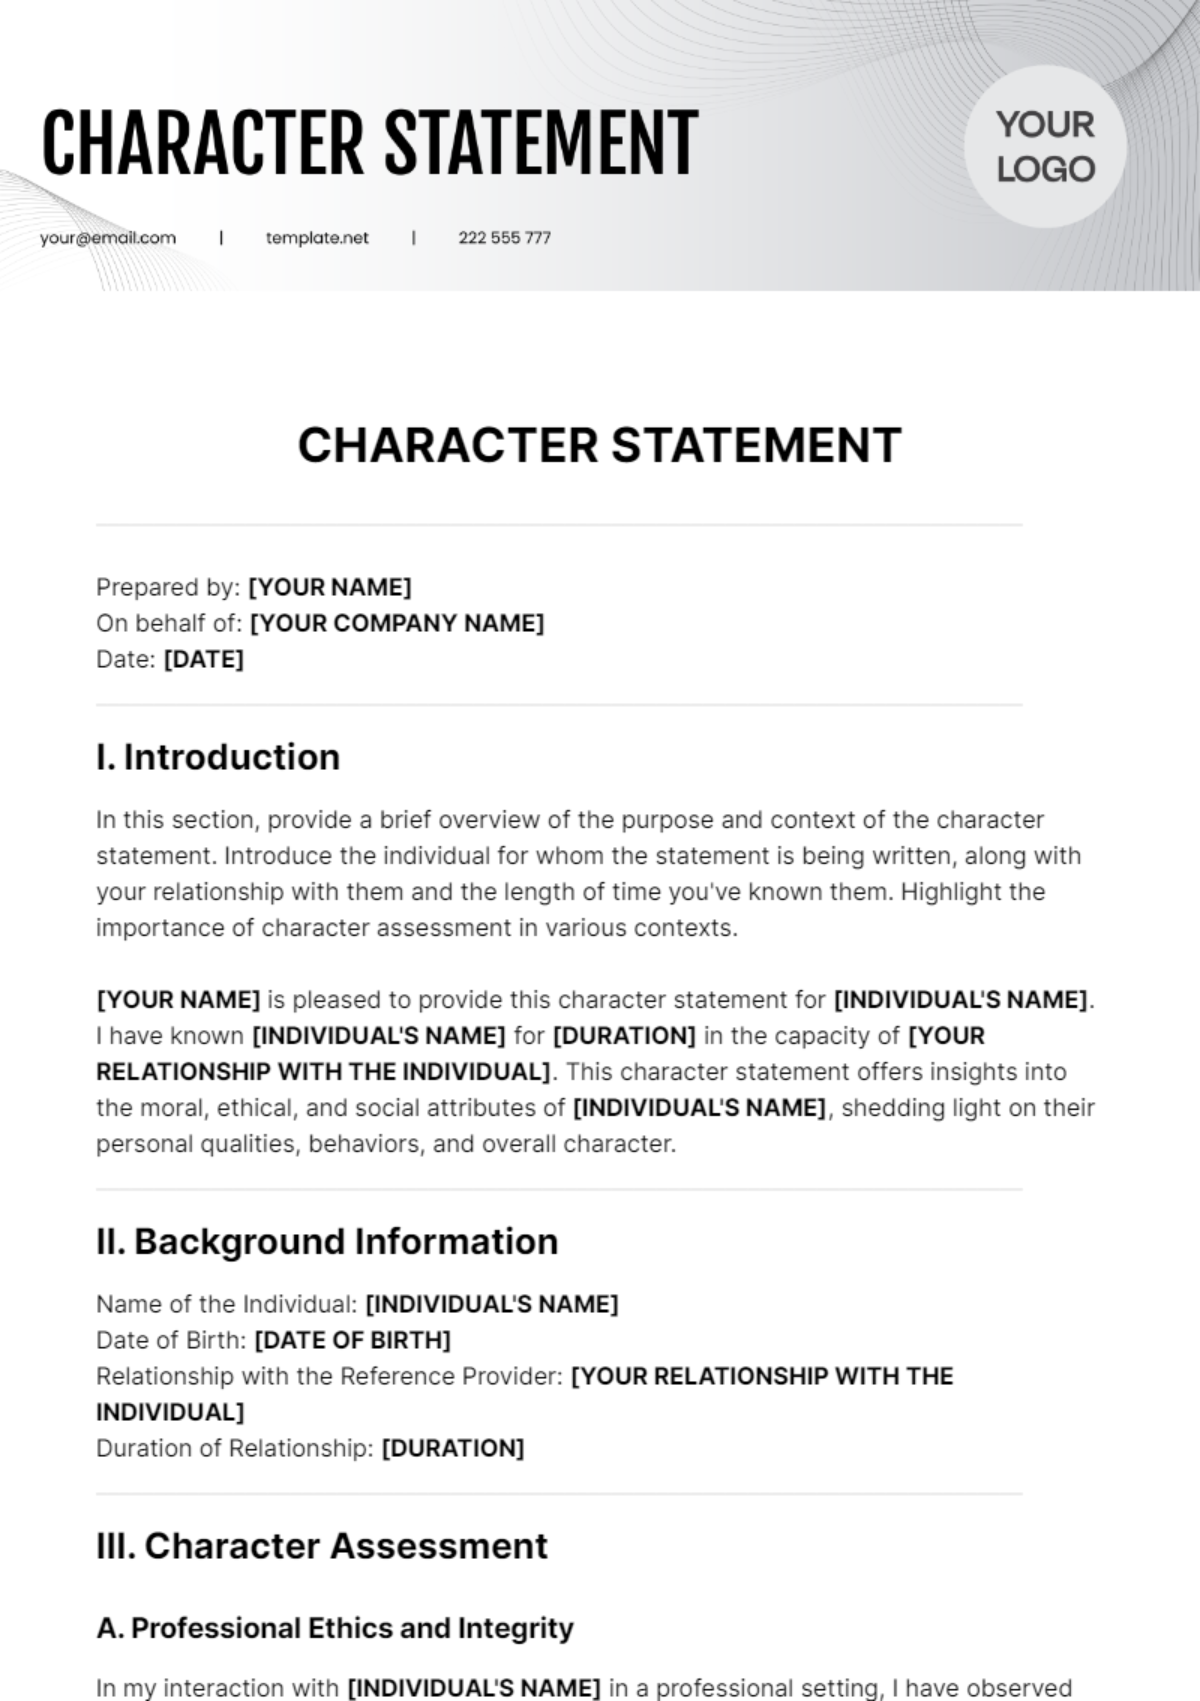 Character Statement Template